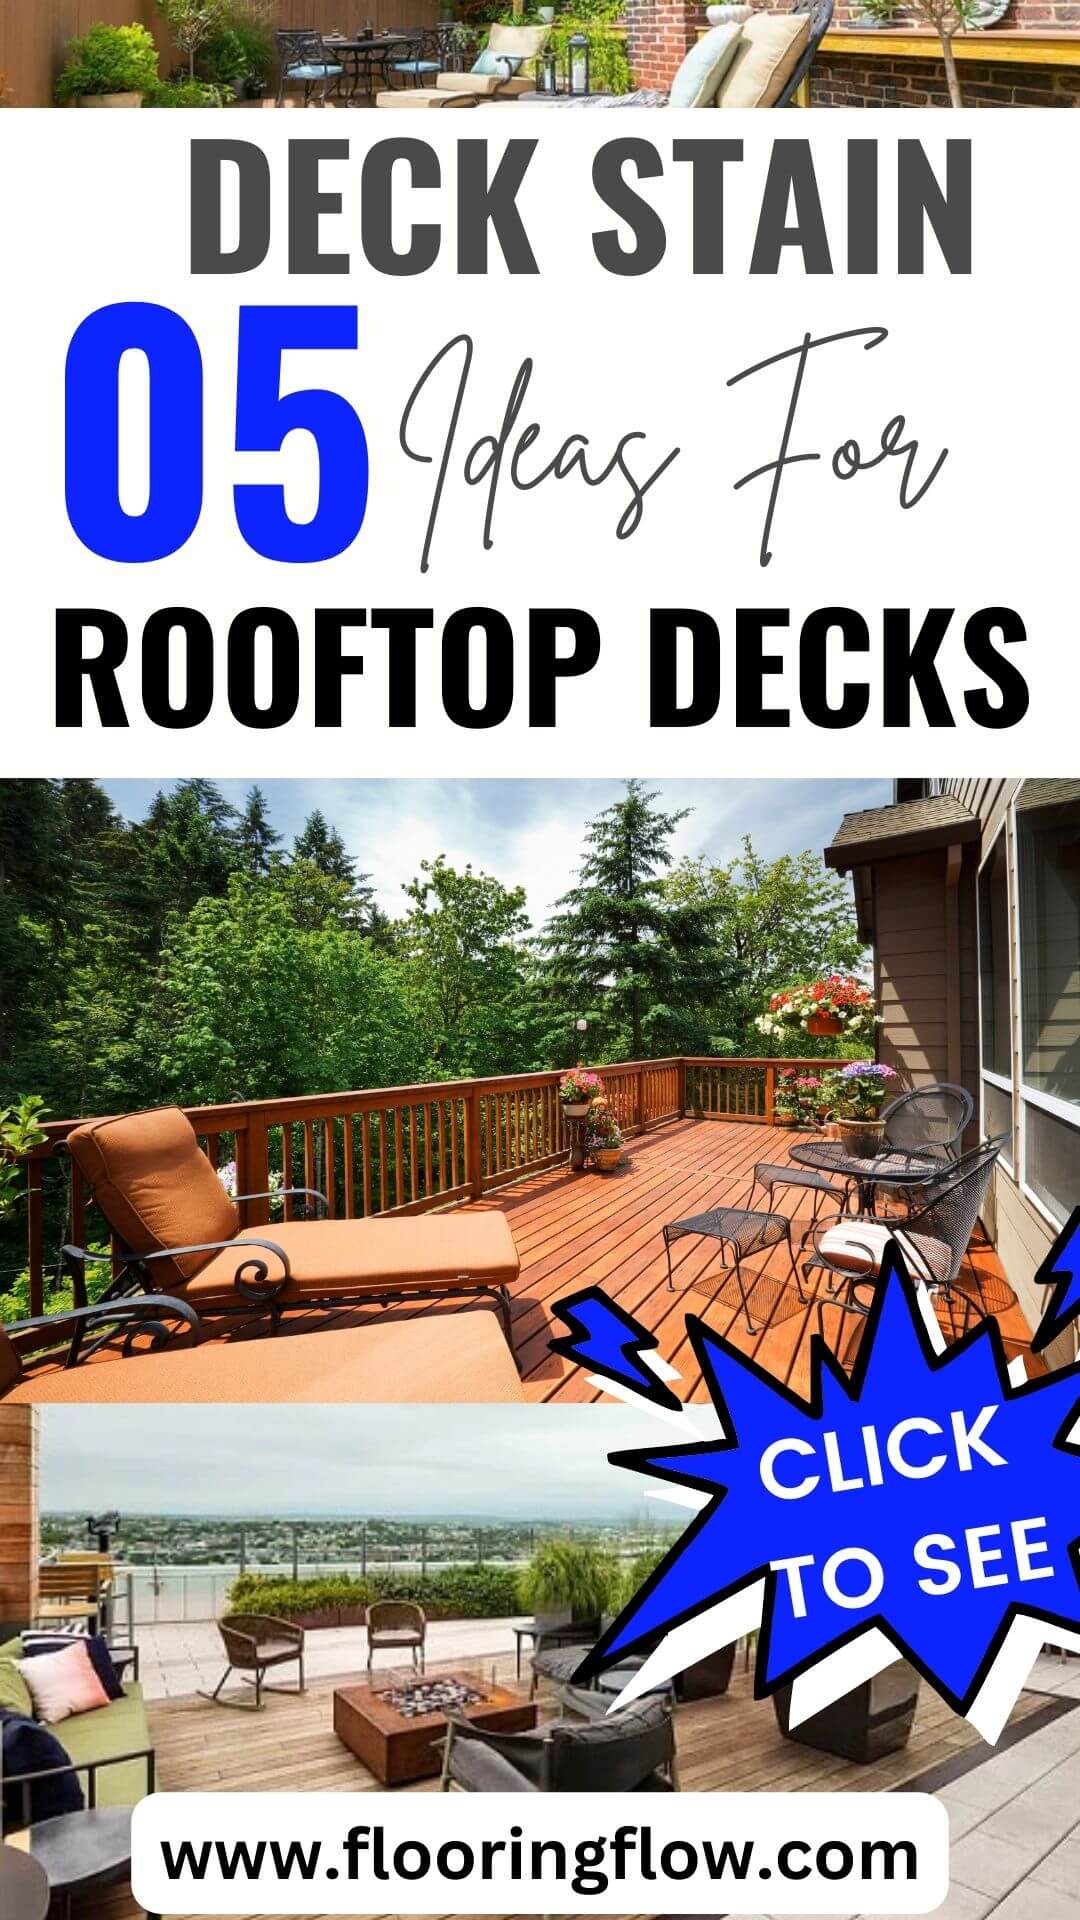 Deck Stain Ideas For Rooftop Decks